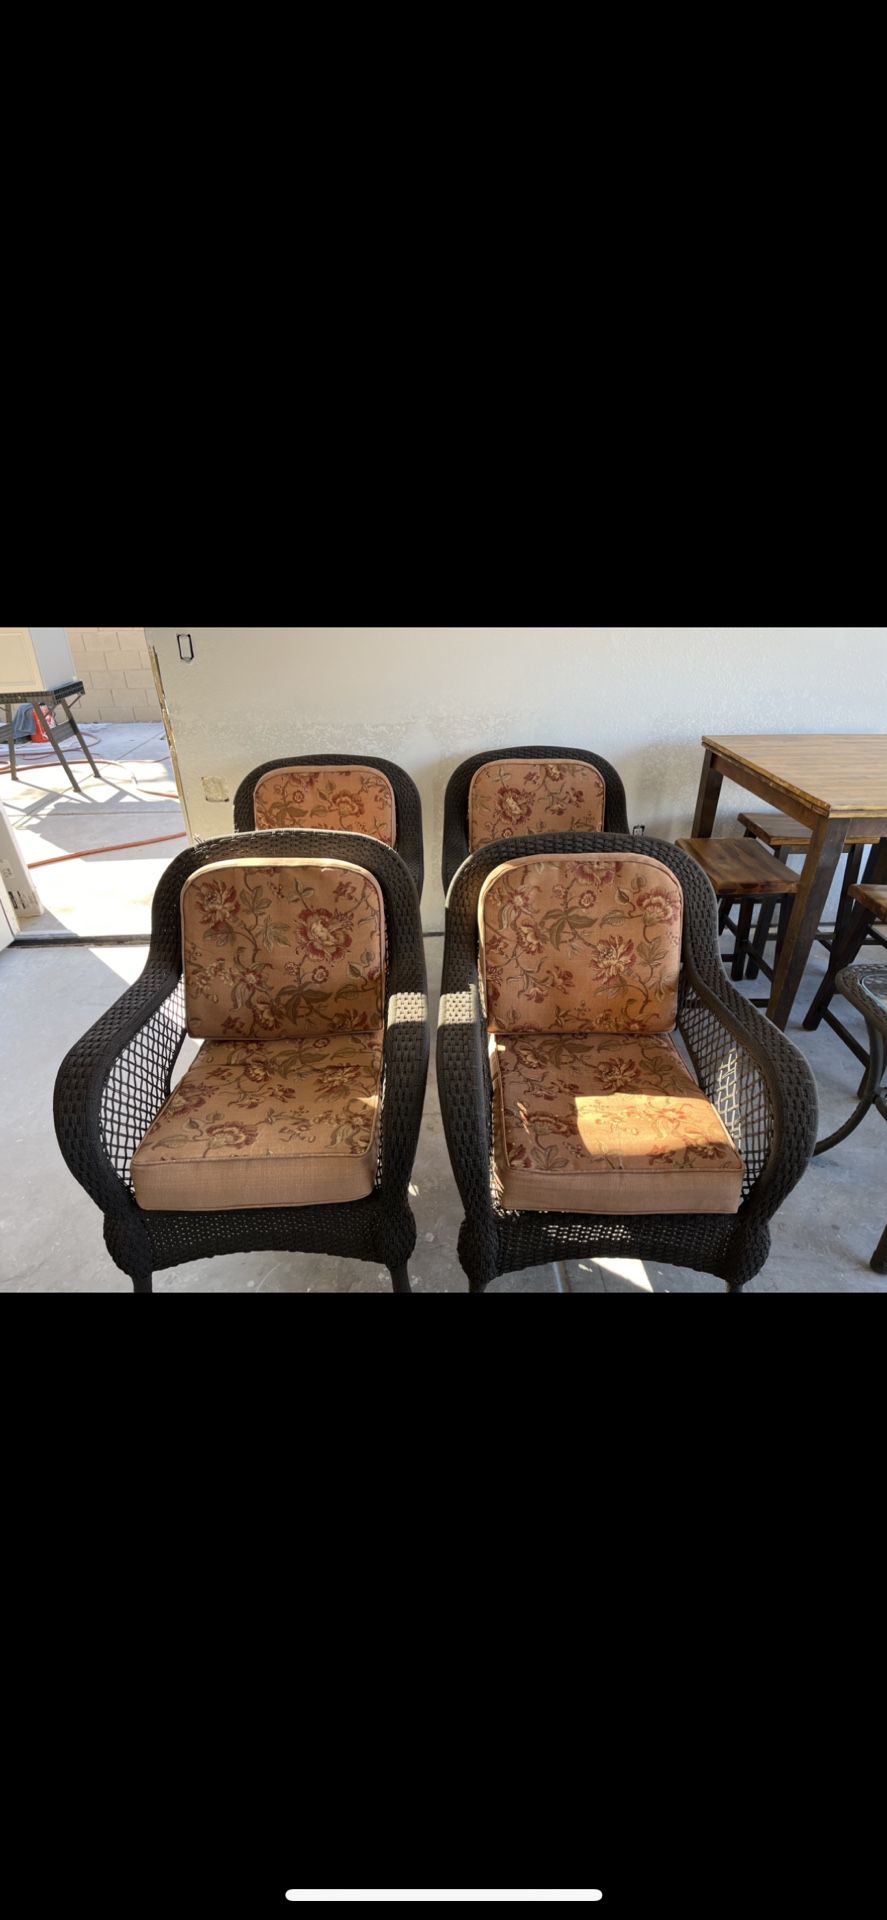 Outdoor Patio Wicker furniture set. 4 chairs and 2 glass tables.